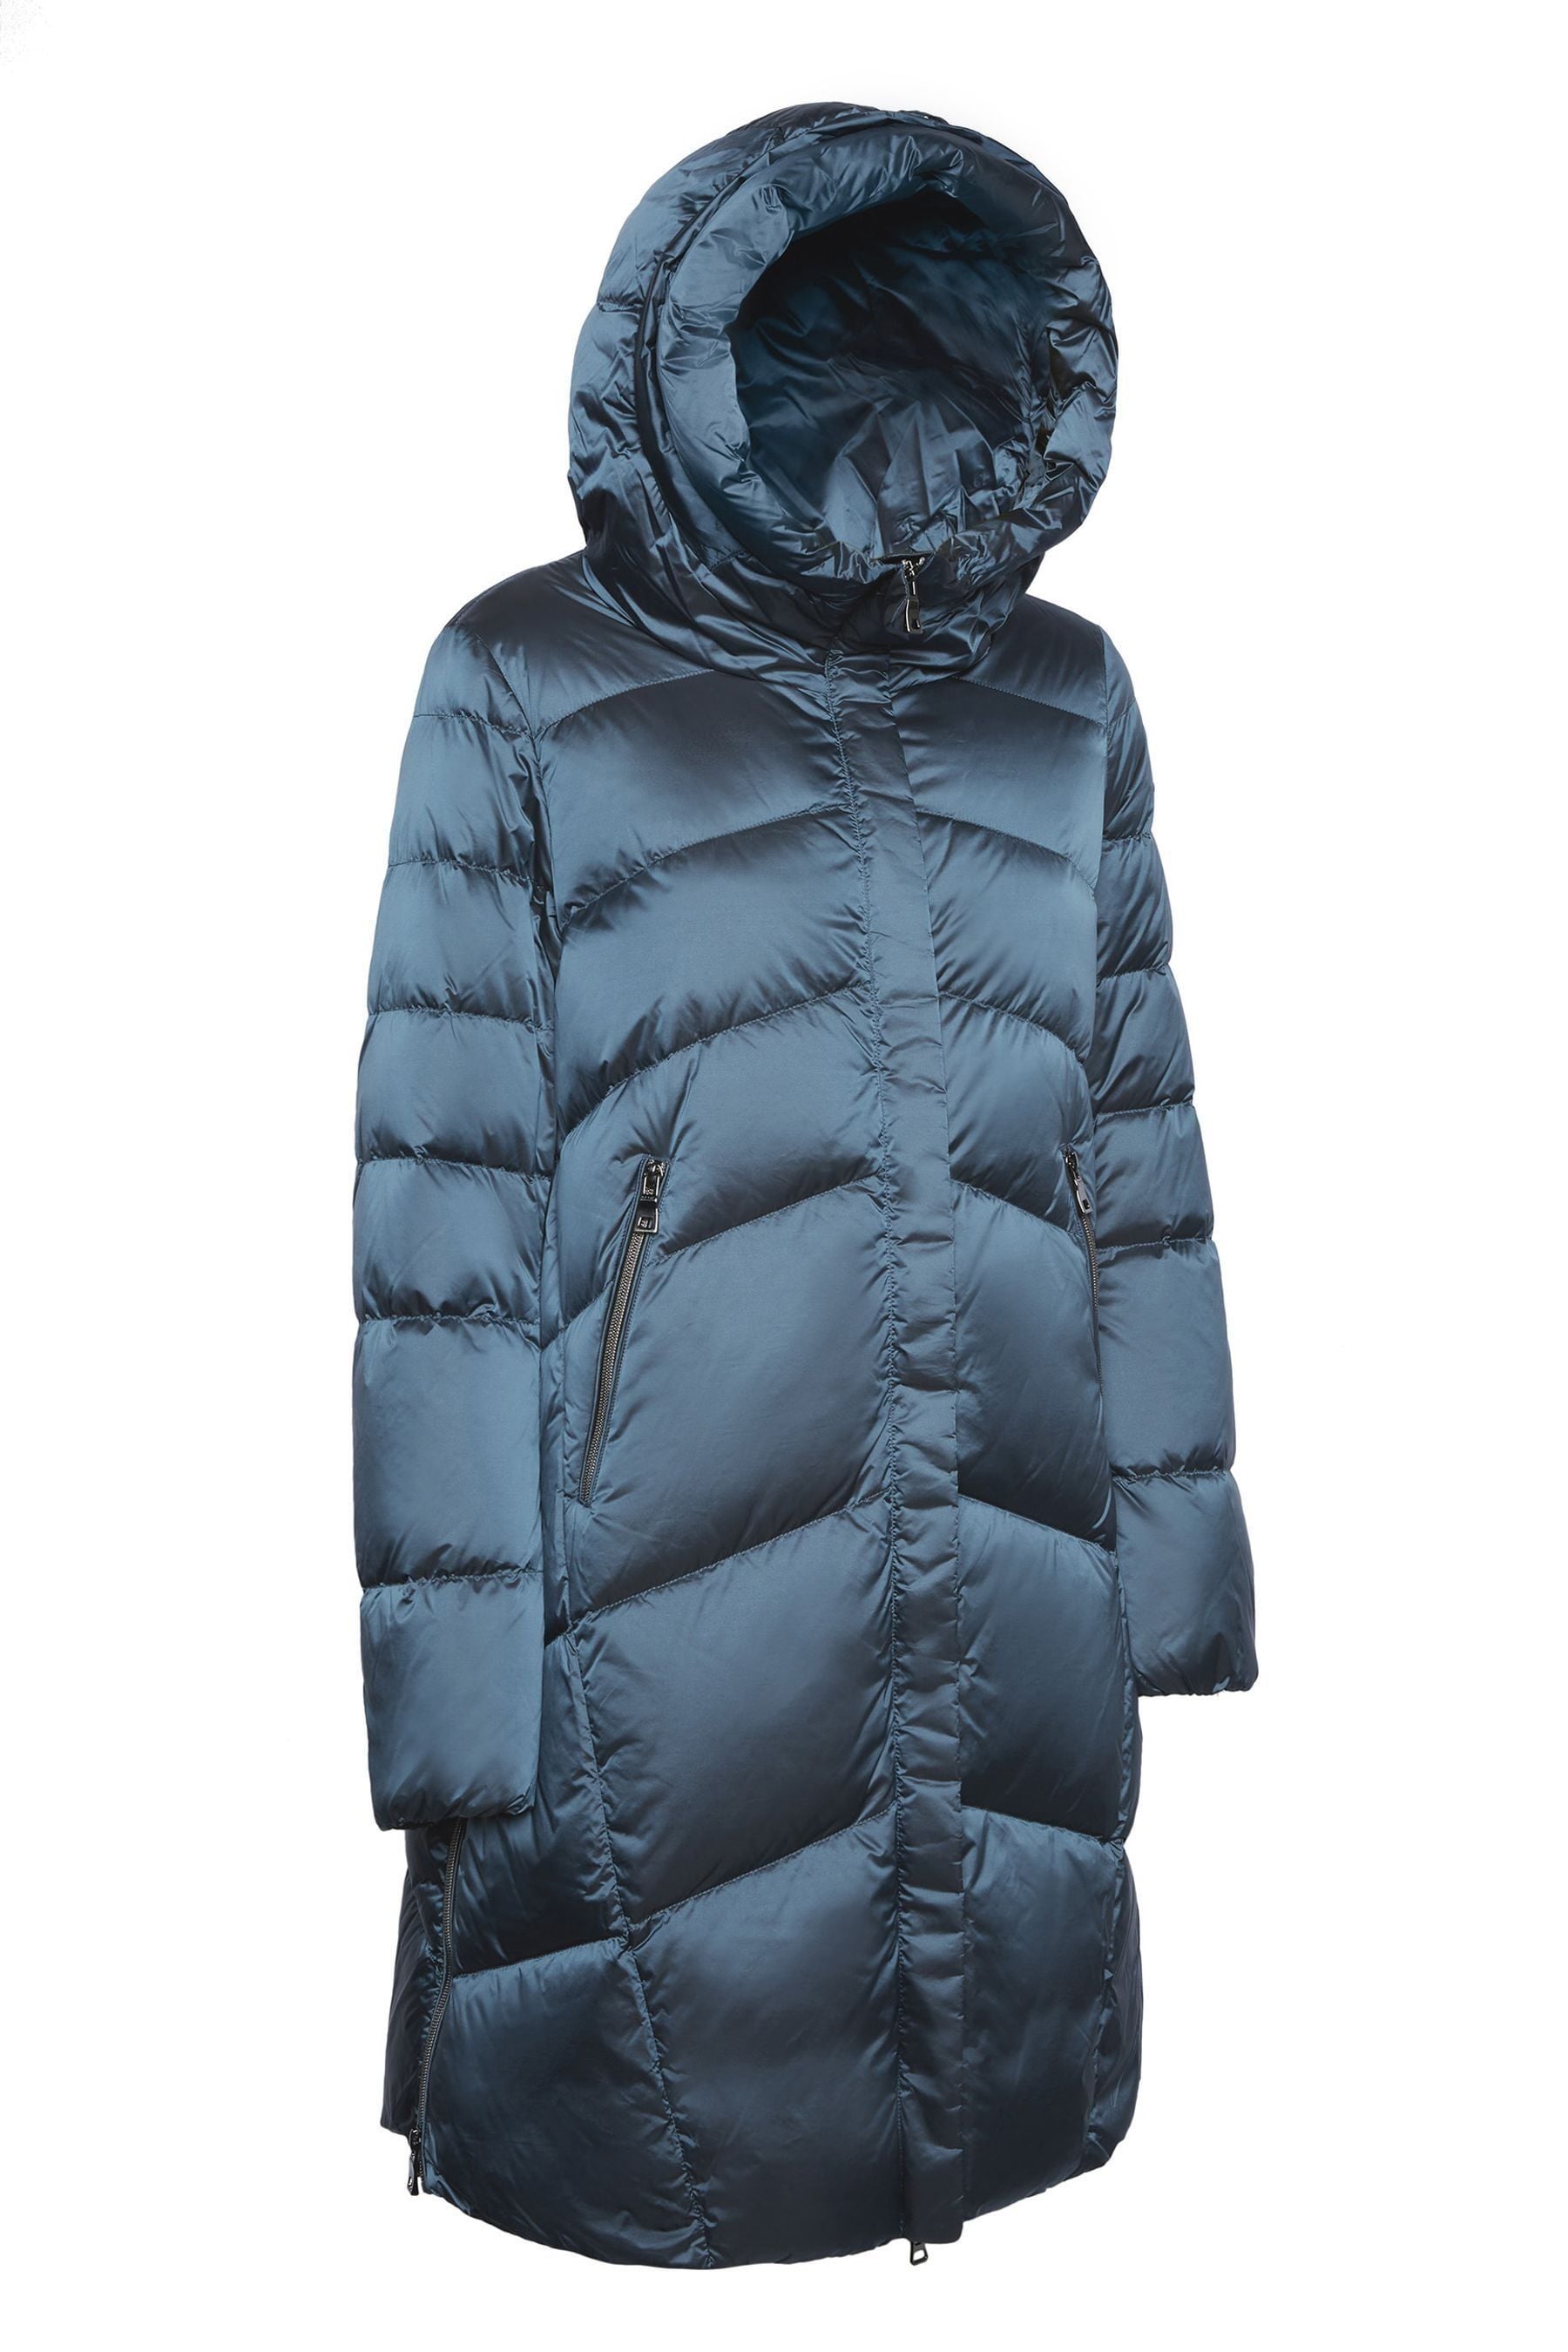 Buy Geox Womens Blue Adrya Parka from the Next UK online shop